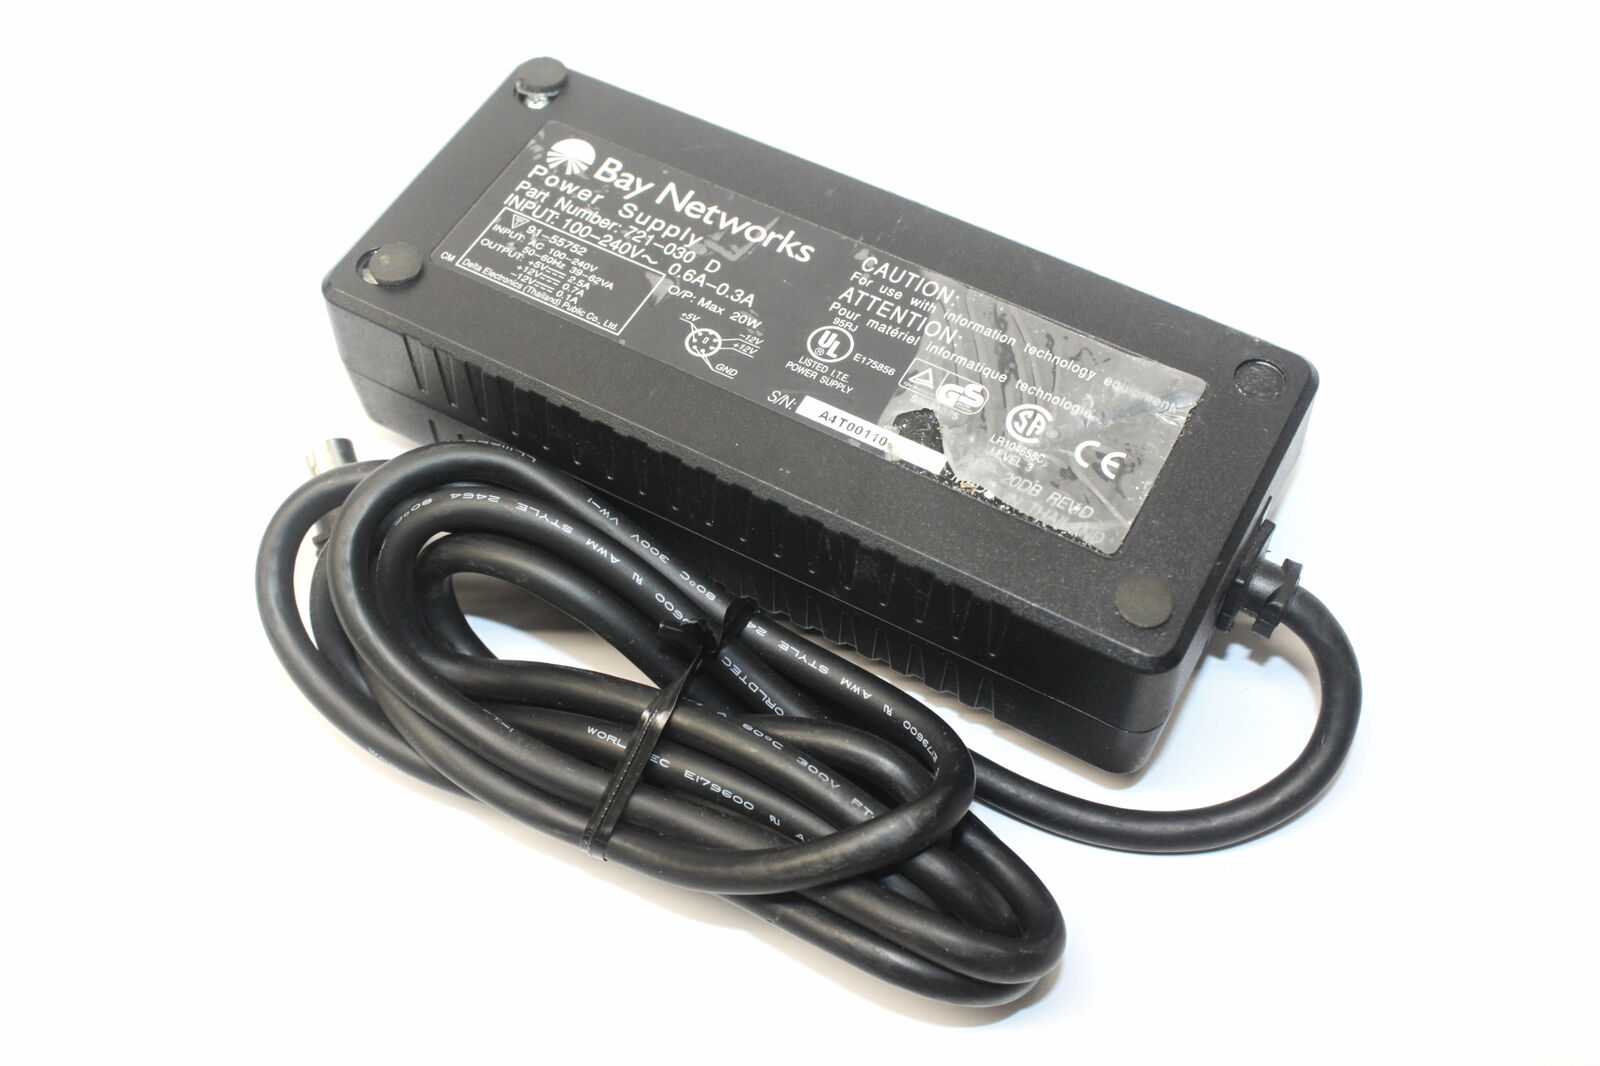 Bay Networks 721-030 D Power Supply AC Adapter Output DC 5V/12V 2.5A/0.7A/0.1A Brand: Bay Networks Type: Adapter M - Click Image to Close